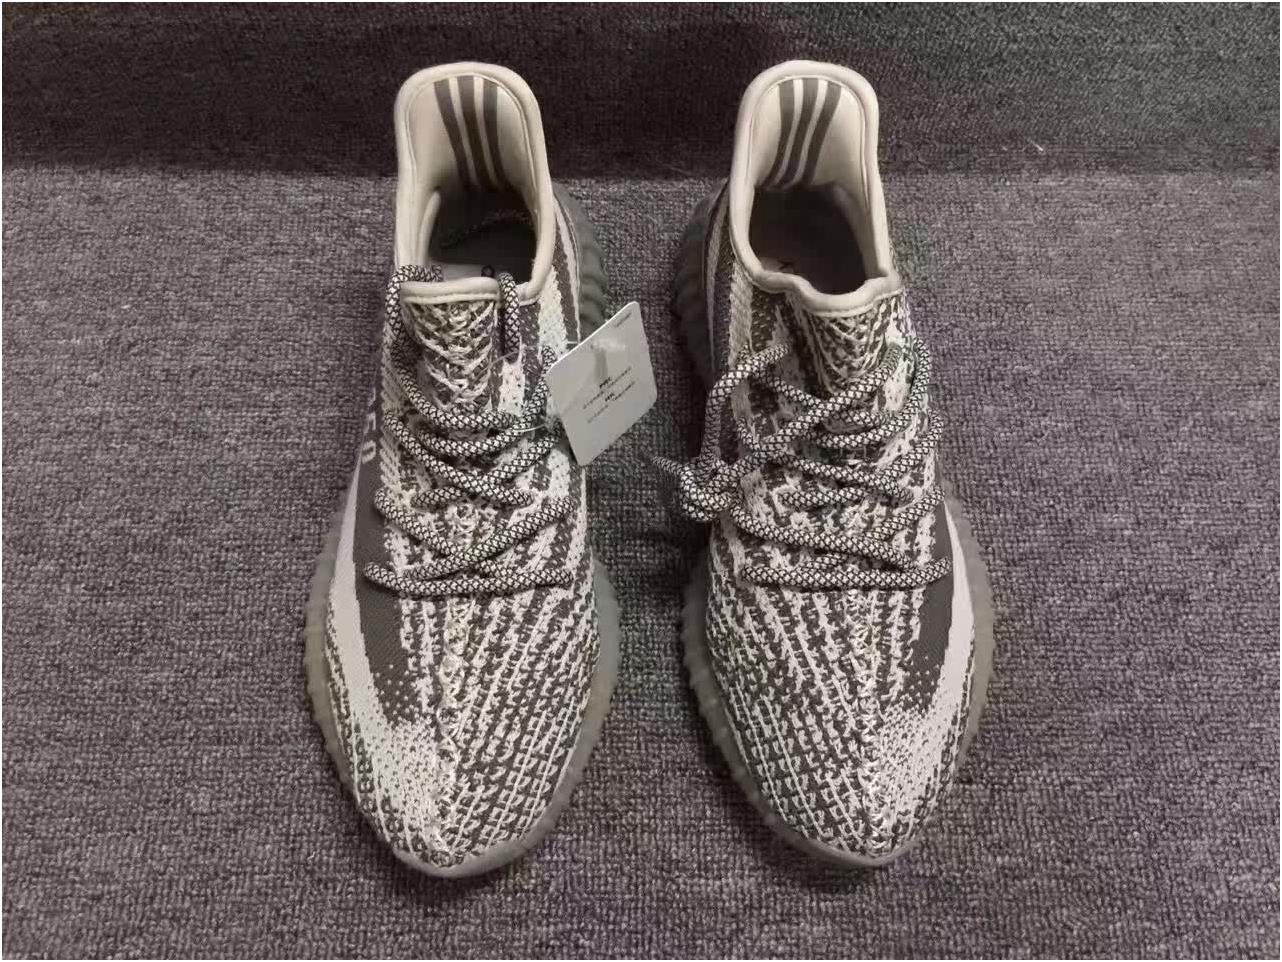 Twitter Reacts to the Adidas Confirmed Yeezy 350 Pirate